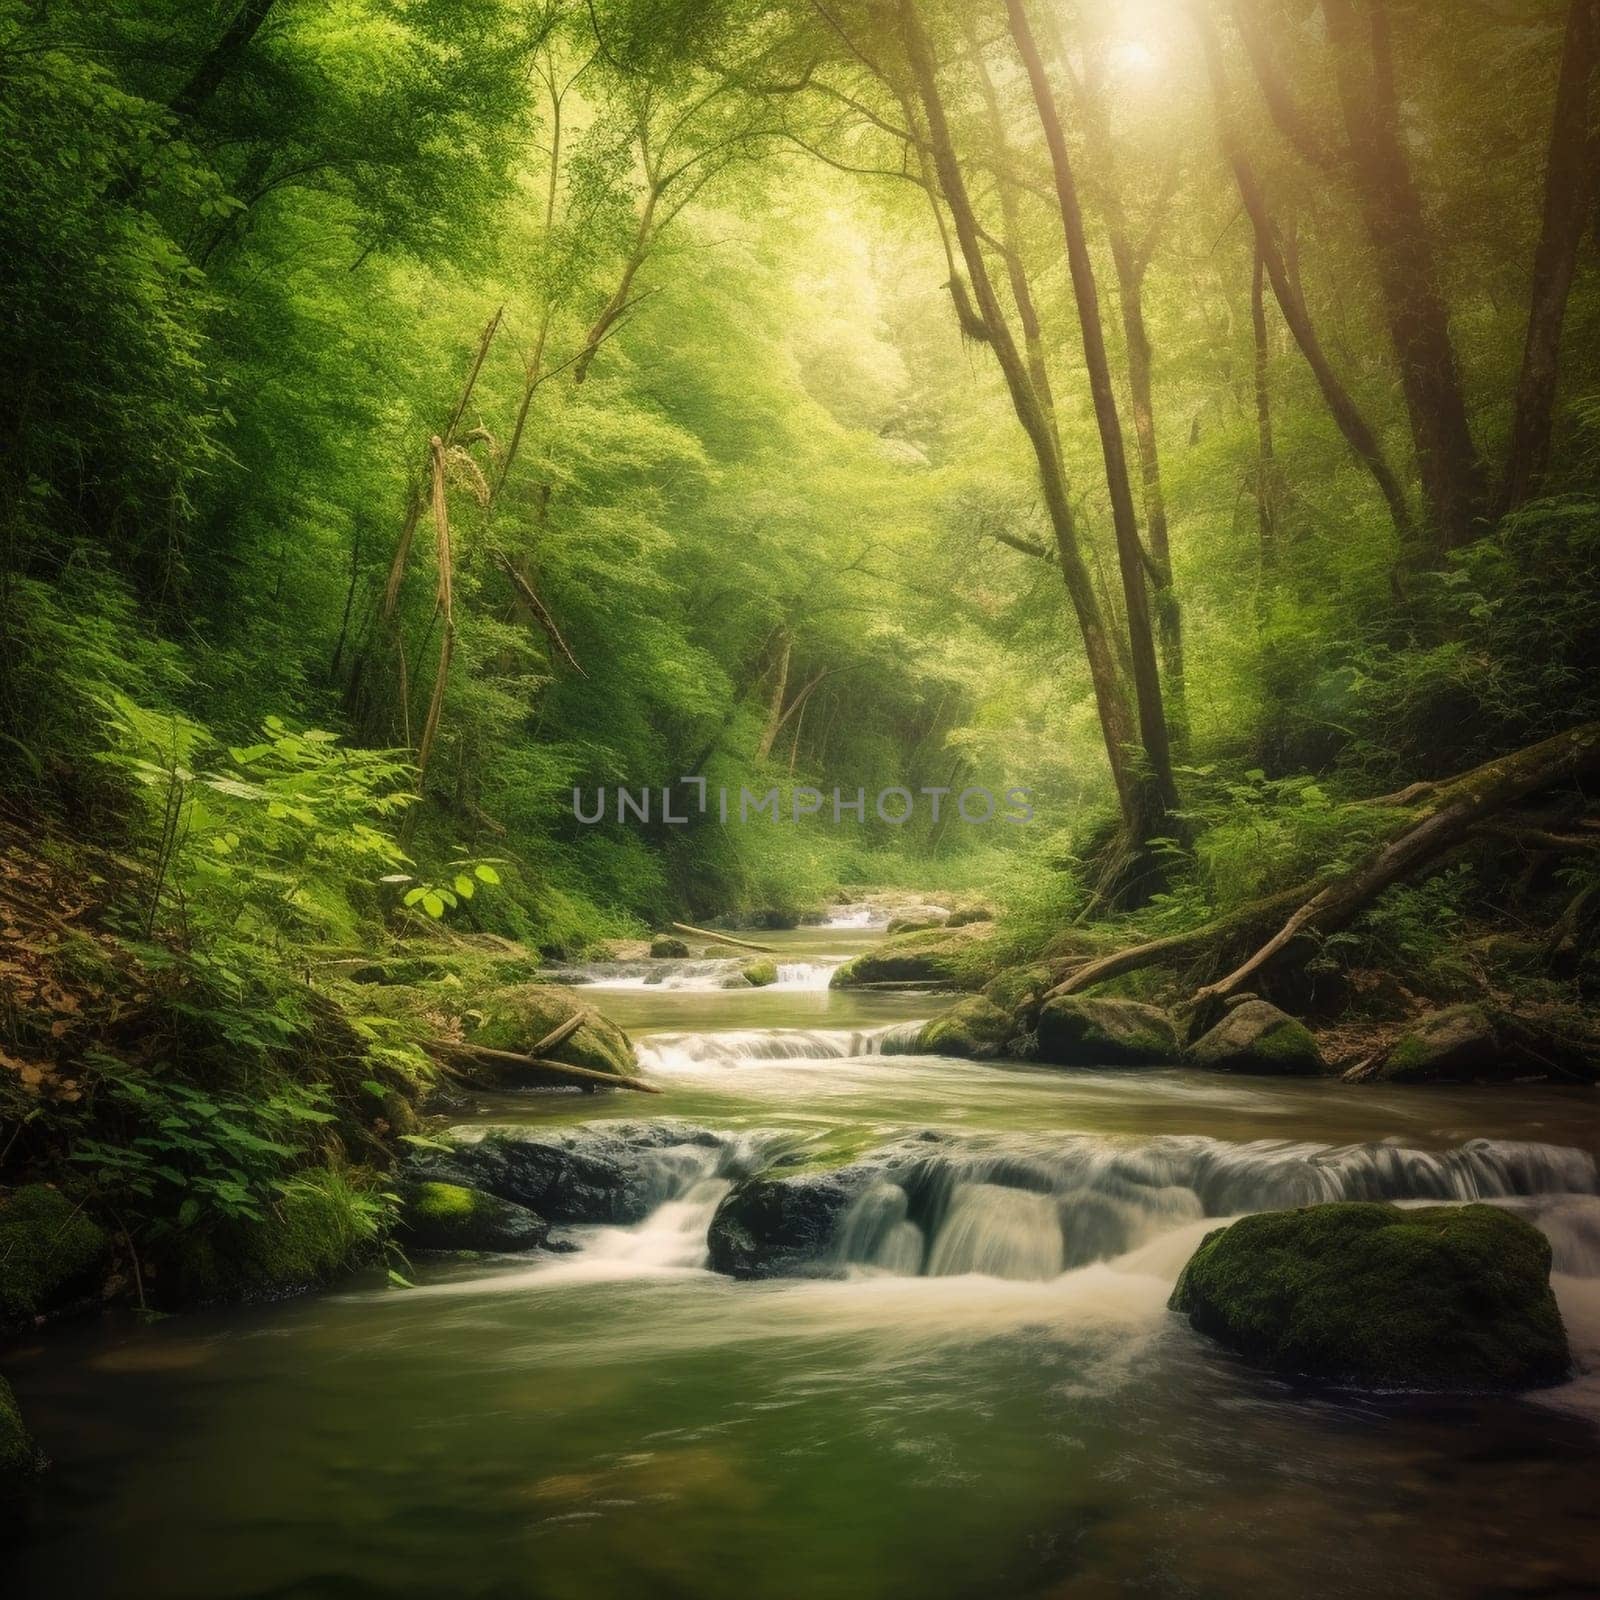 This image depicts a serene river flowing through a lush green forest, with a waterfall cascading in the background. It celebrates World Water Day and inspires people to take action in preserving our planet's water resources. Clean and accessible water is essential for life and is a human right. However, water scarcity, pollution, and climate change threaten the availability and quality of water resources around the world. This image serves as a reminder of the beauty and importance of water and encourages individuals and communities to take action in protecting and conserving this precious resource.